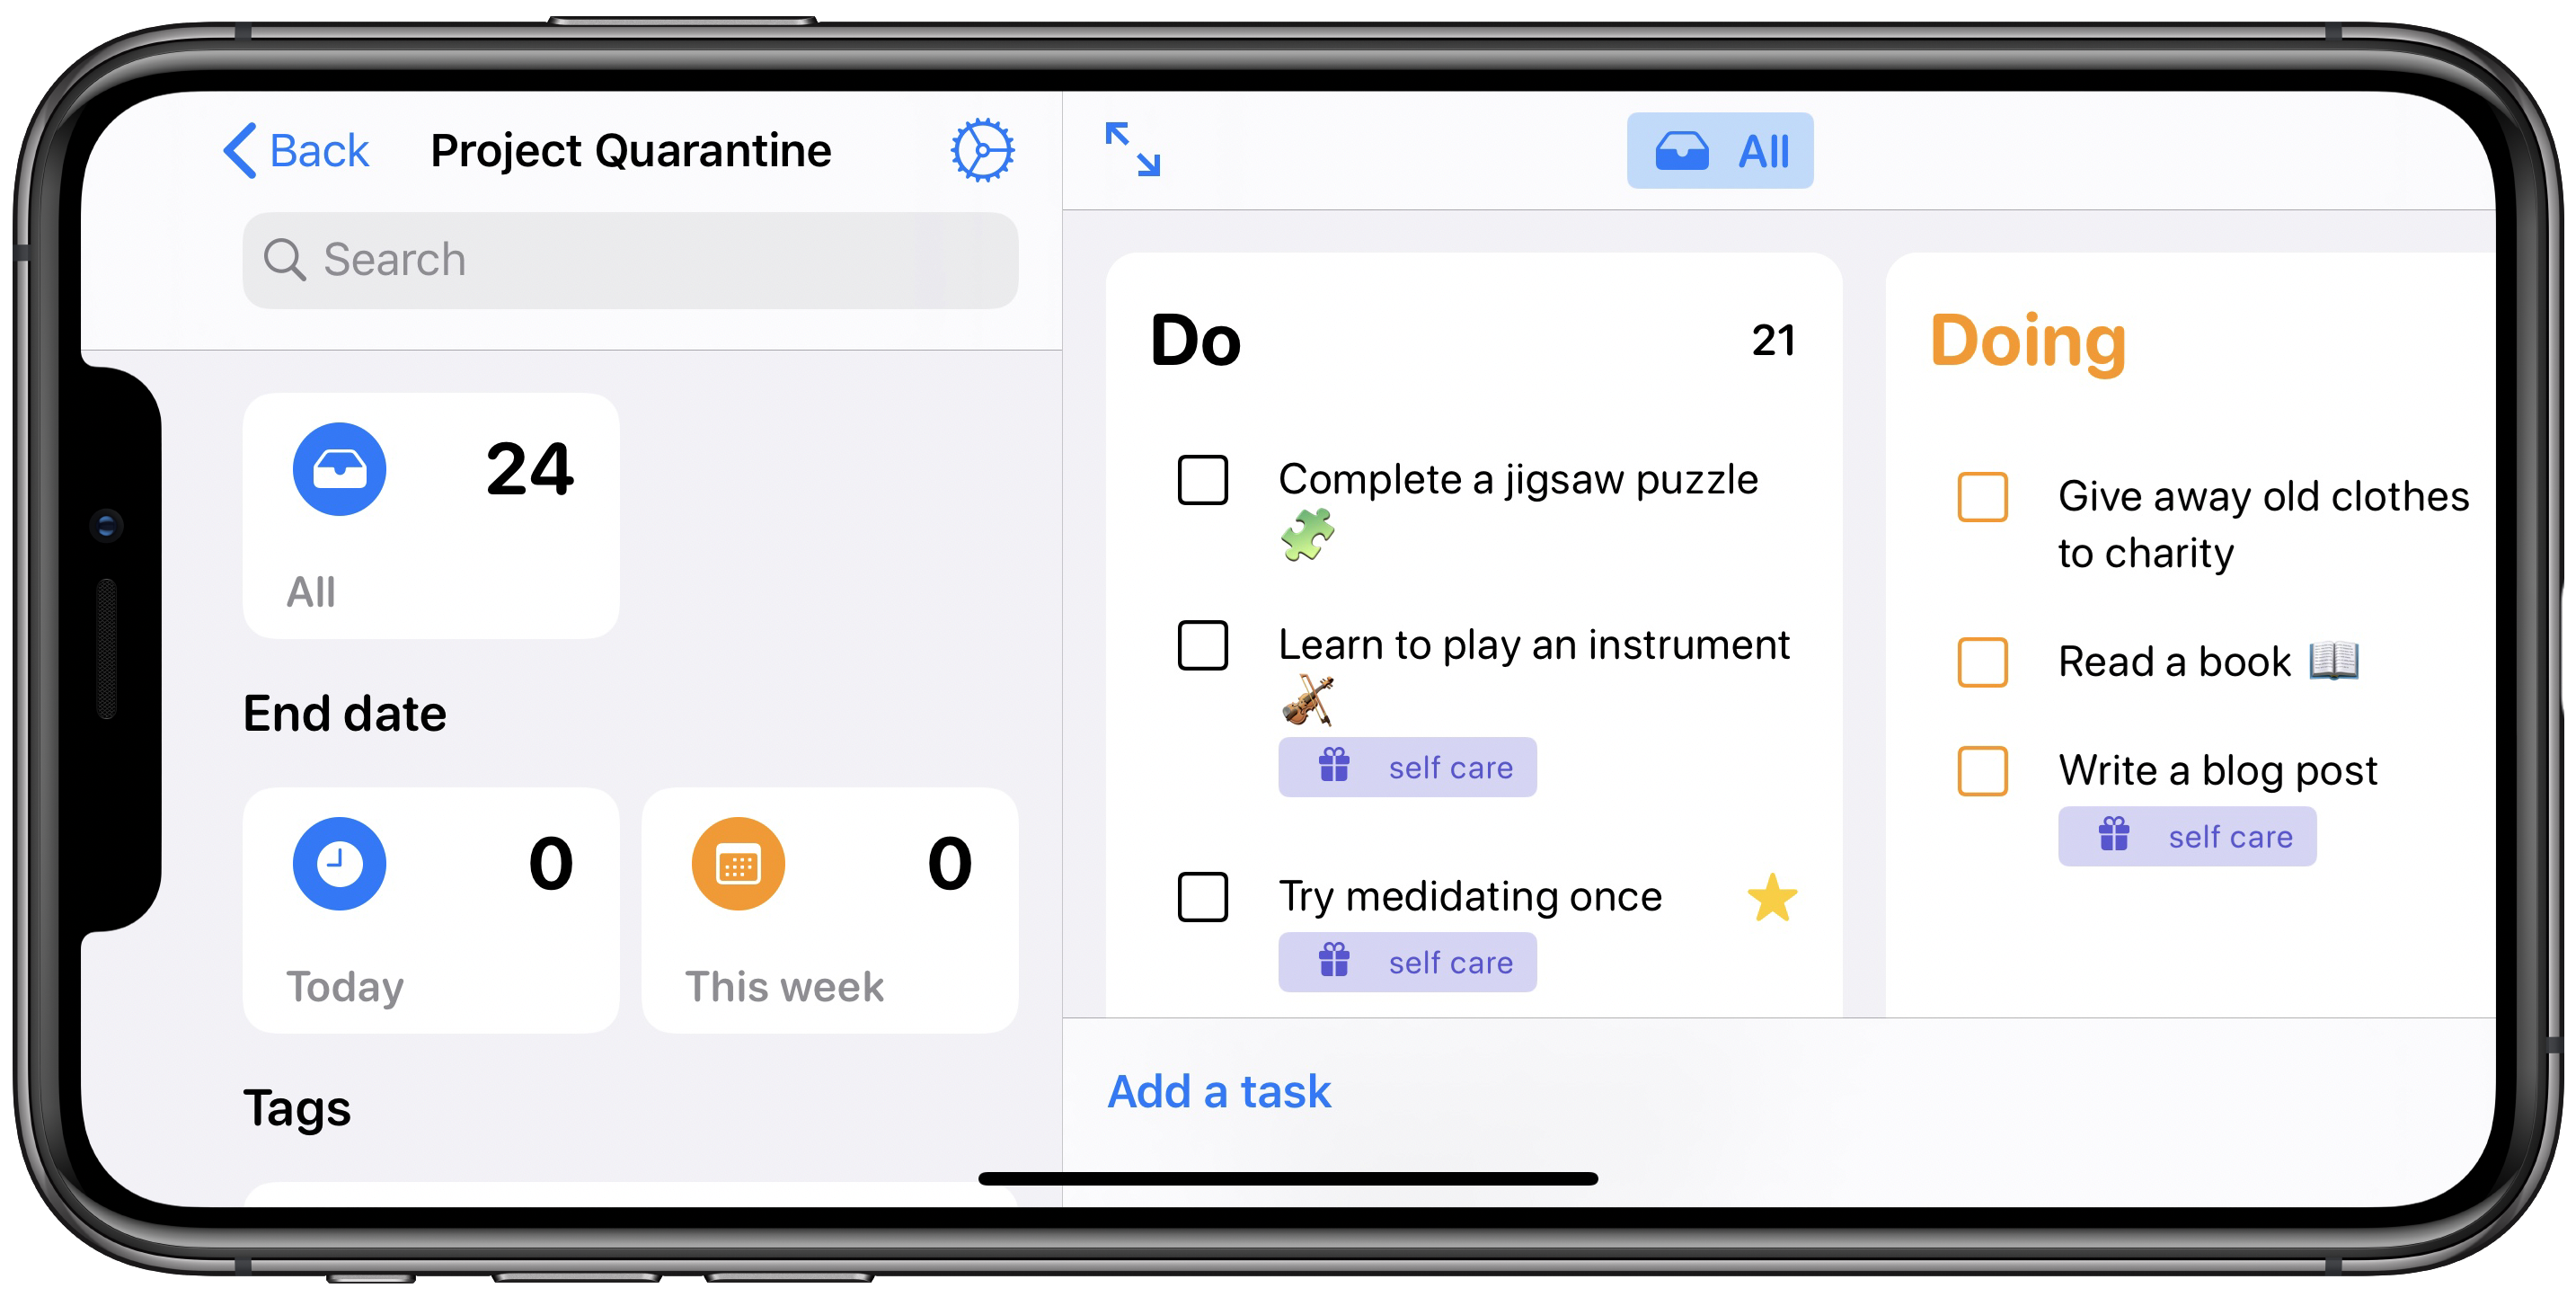 Tasks is a new iOS app that helps you organize projects by priority in